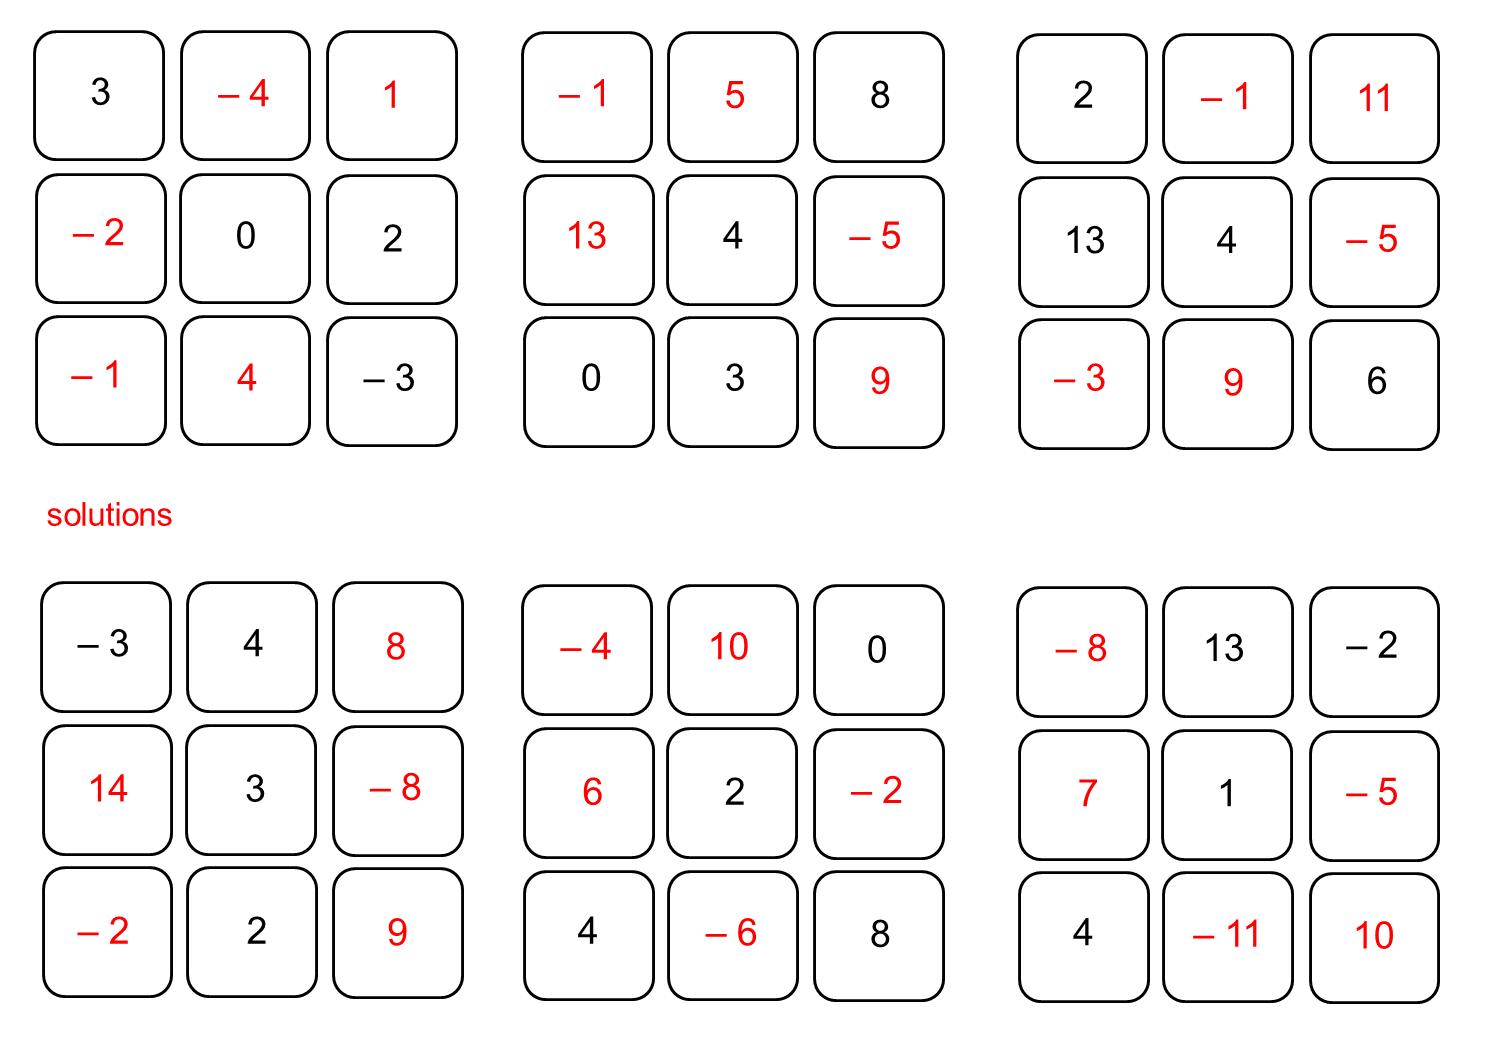 median-don-steward-magic-squares-with-negative-numbers